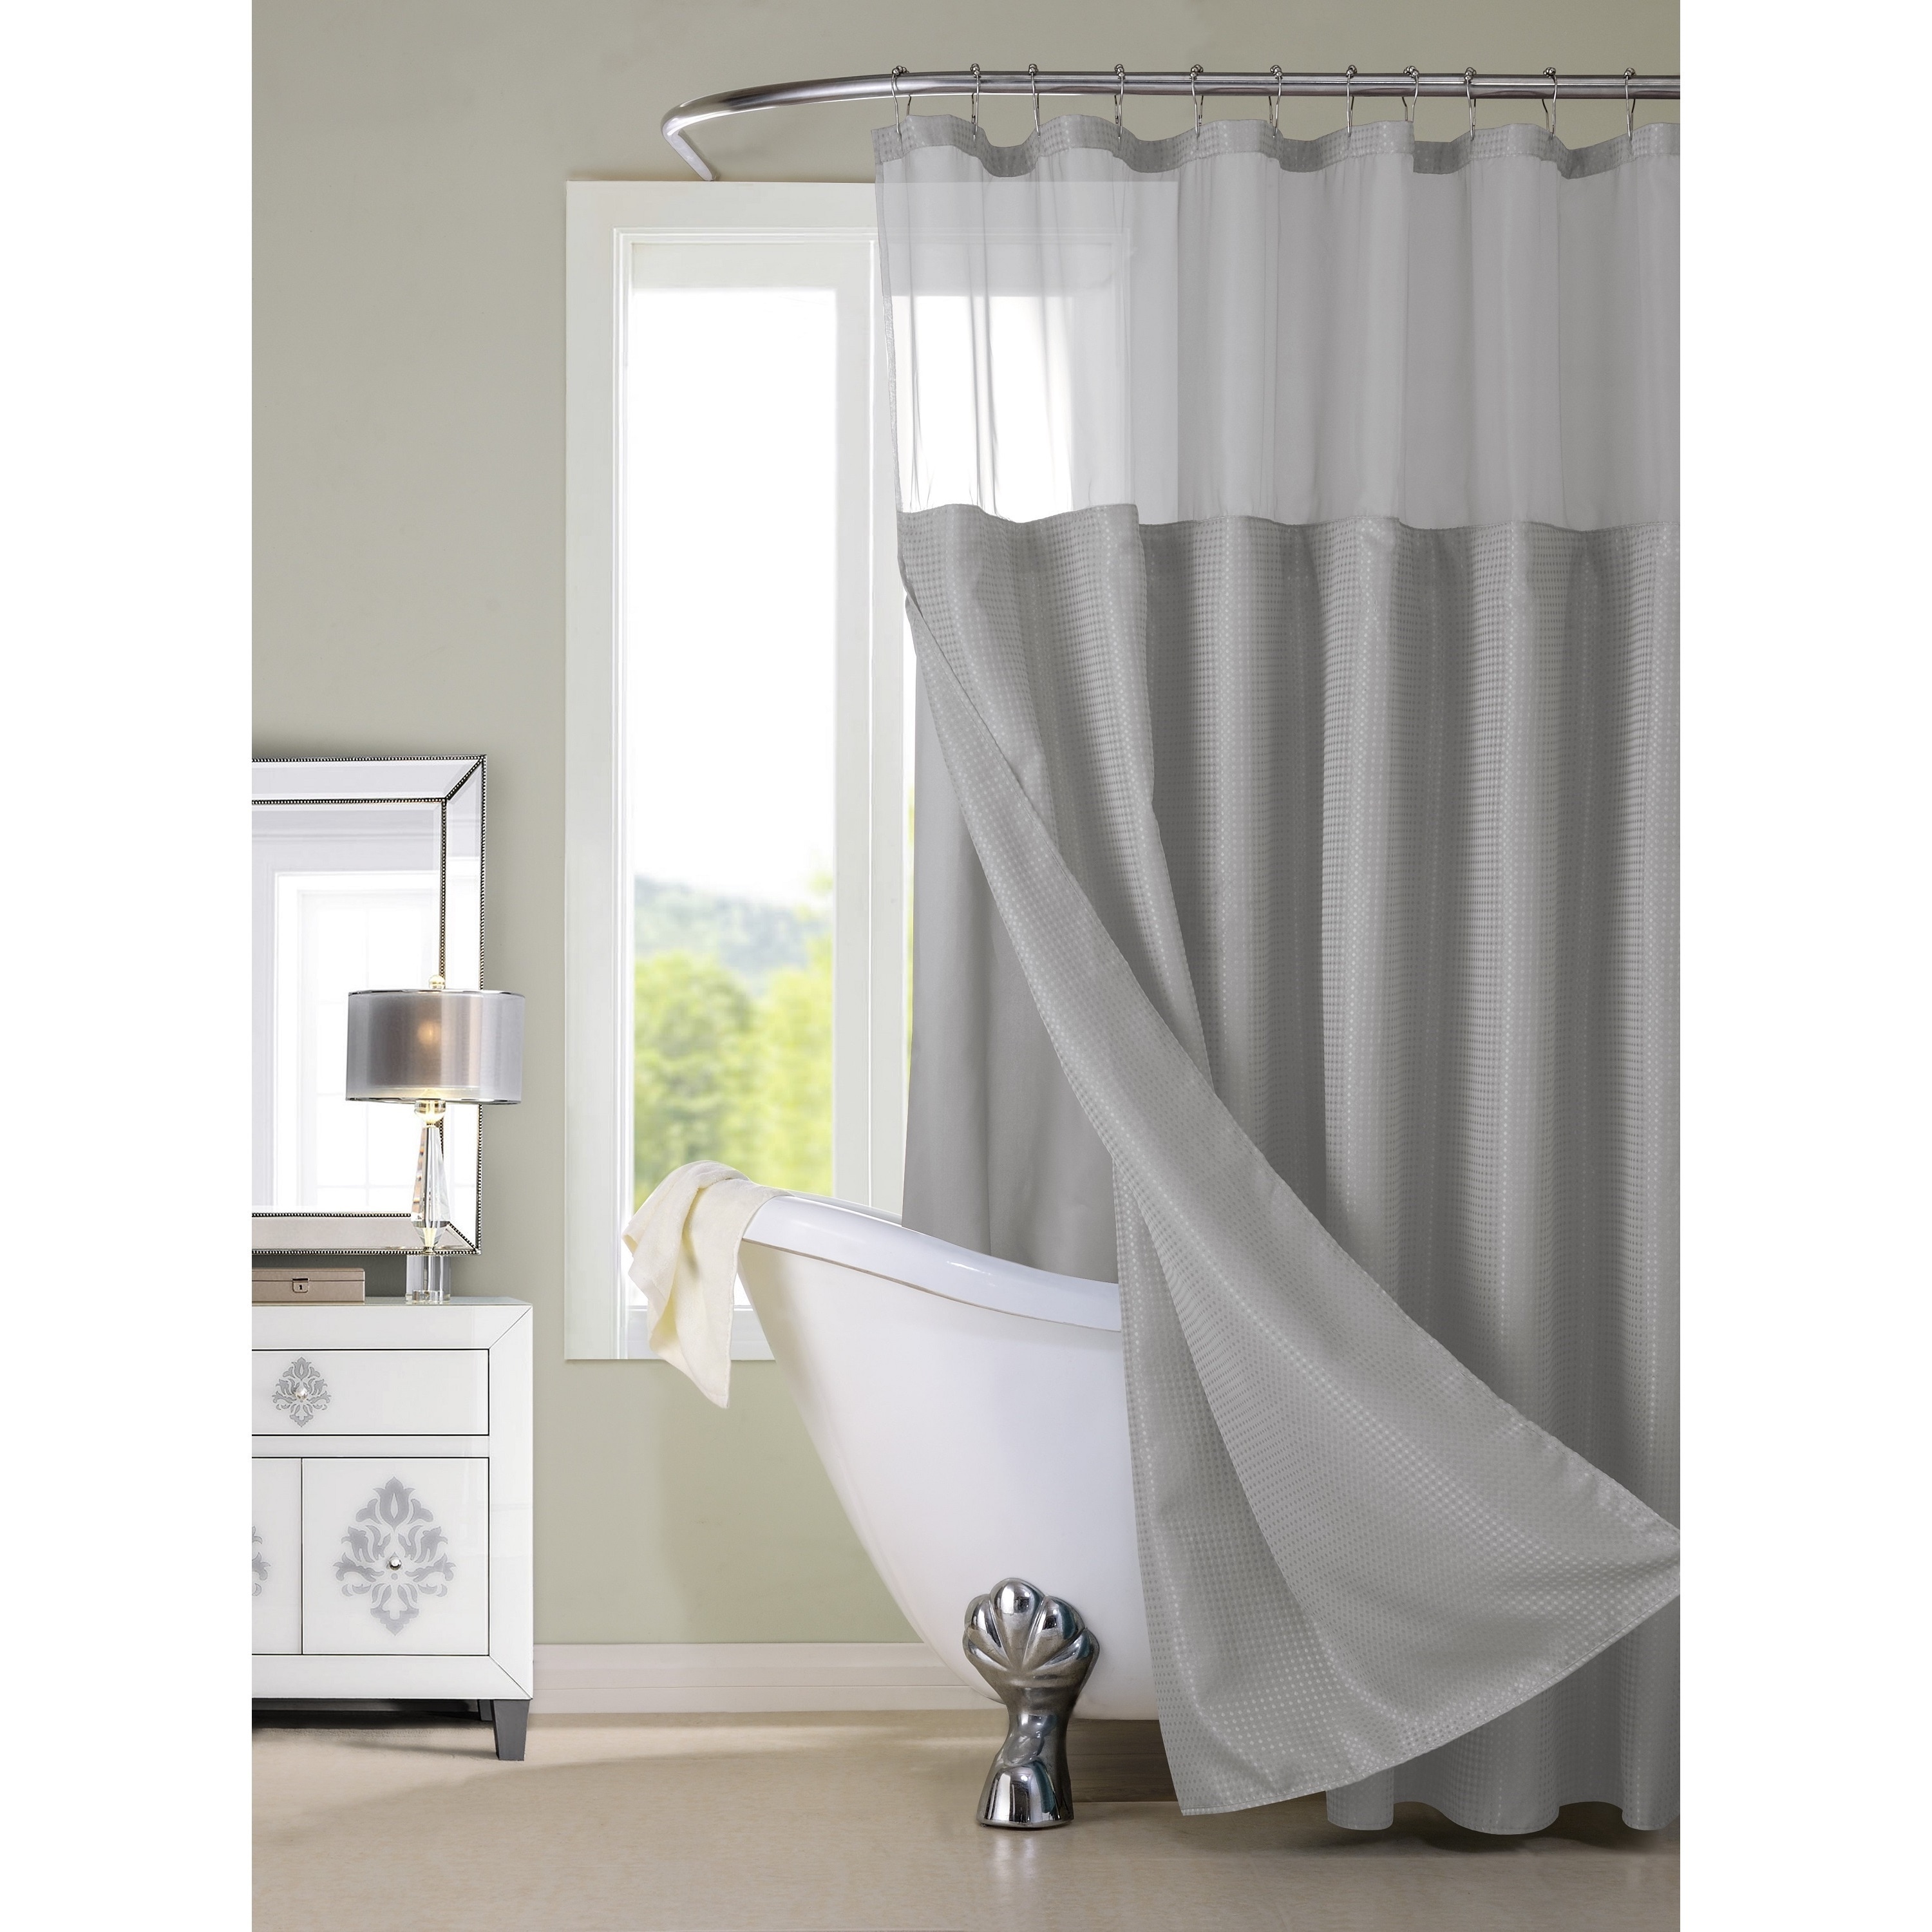 silver shower curtain